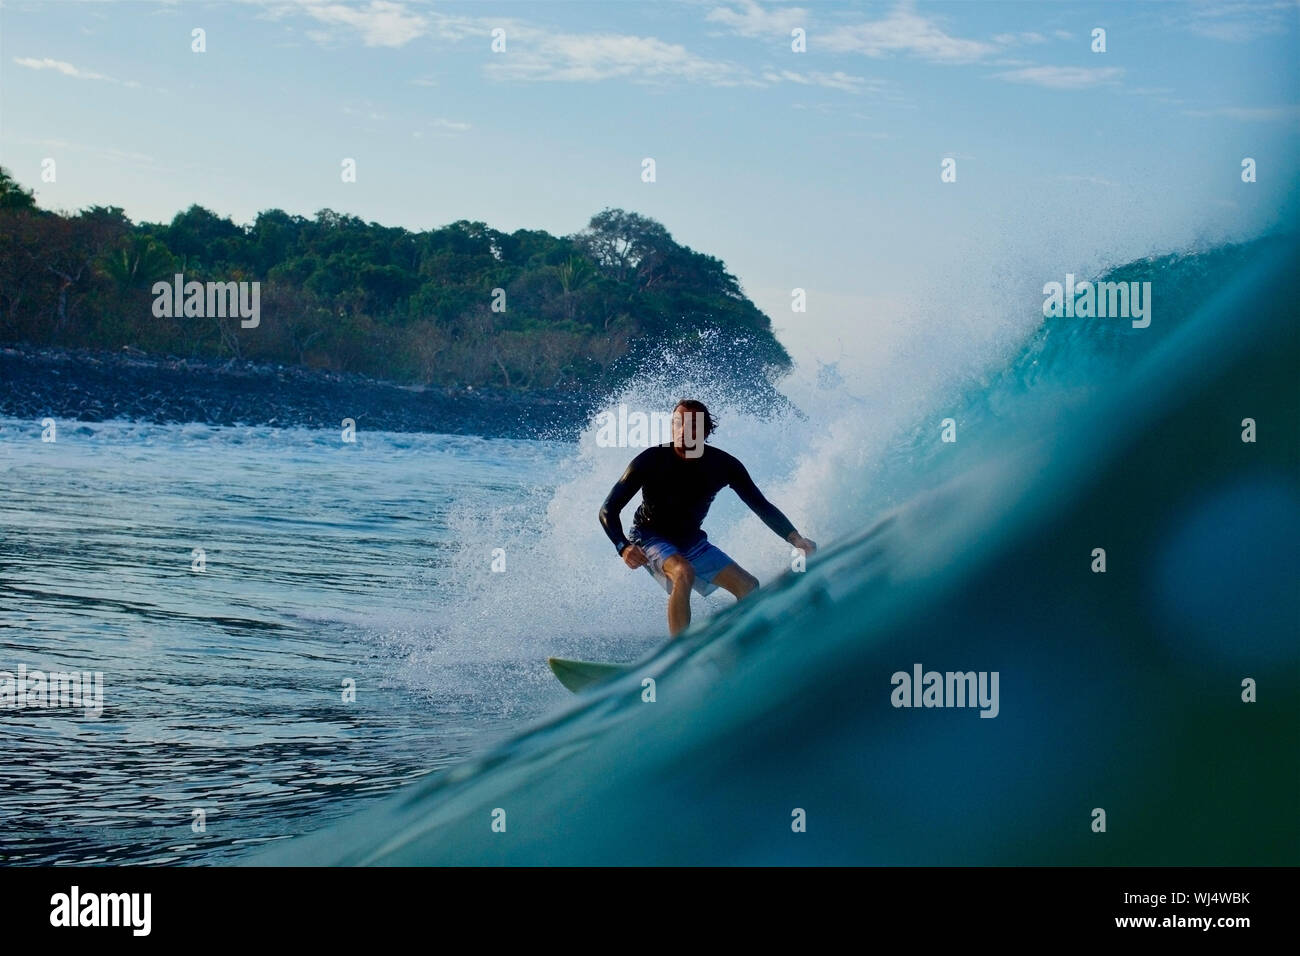 Male surfer riding ocean wave Stock Photo